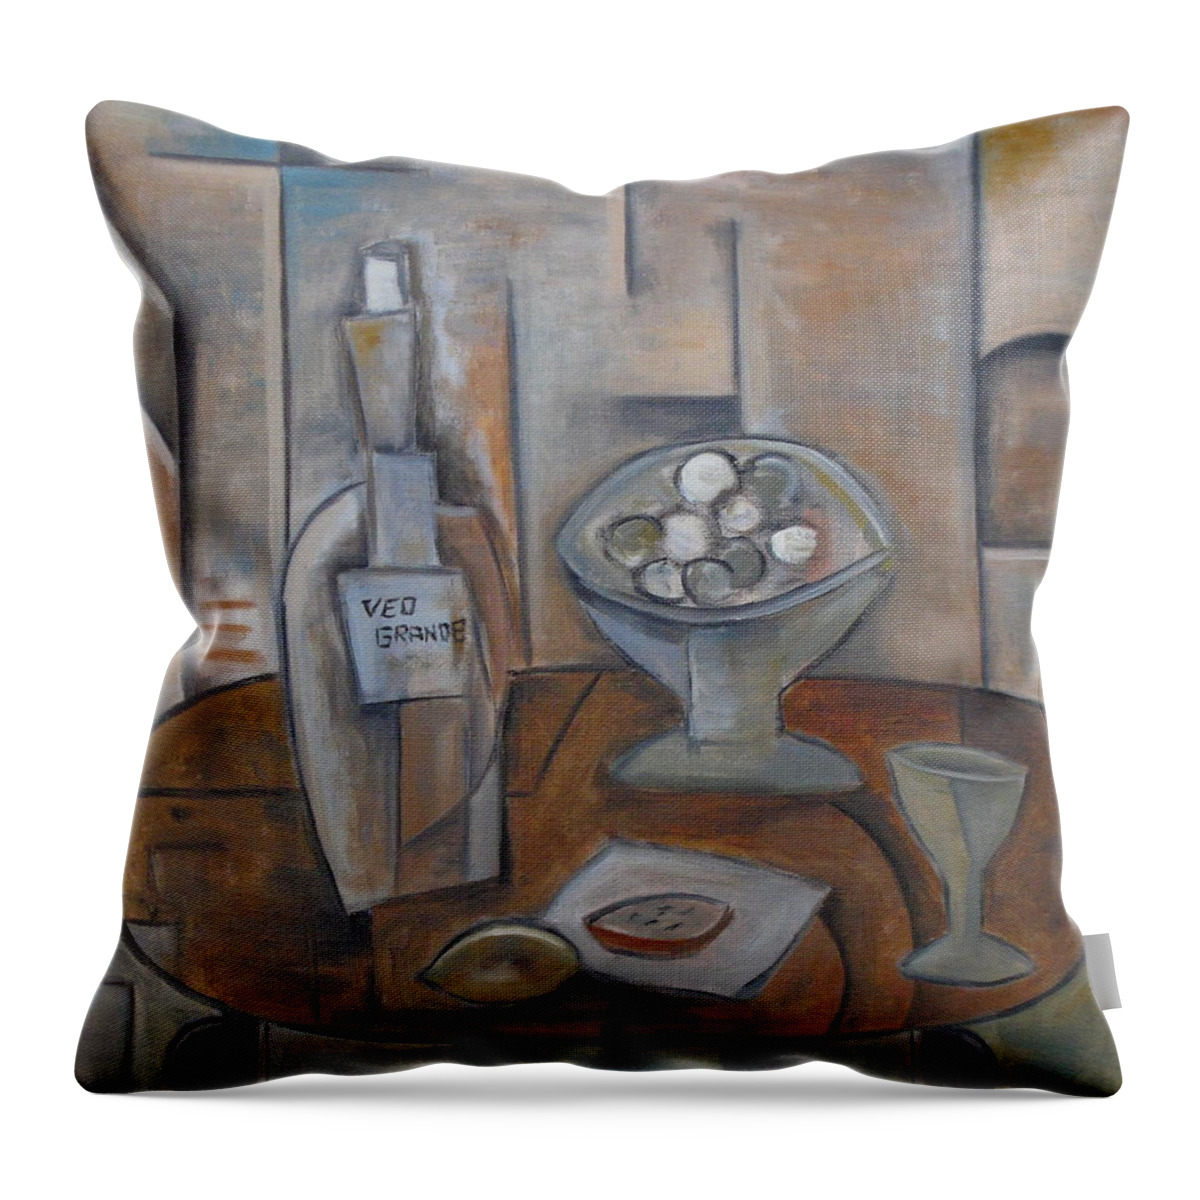 Cubism Throw Pillow featuring the painting Veo Grande by Trish Toro